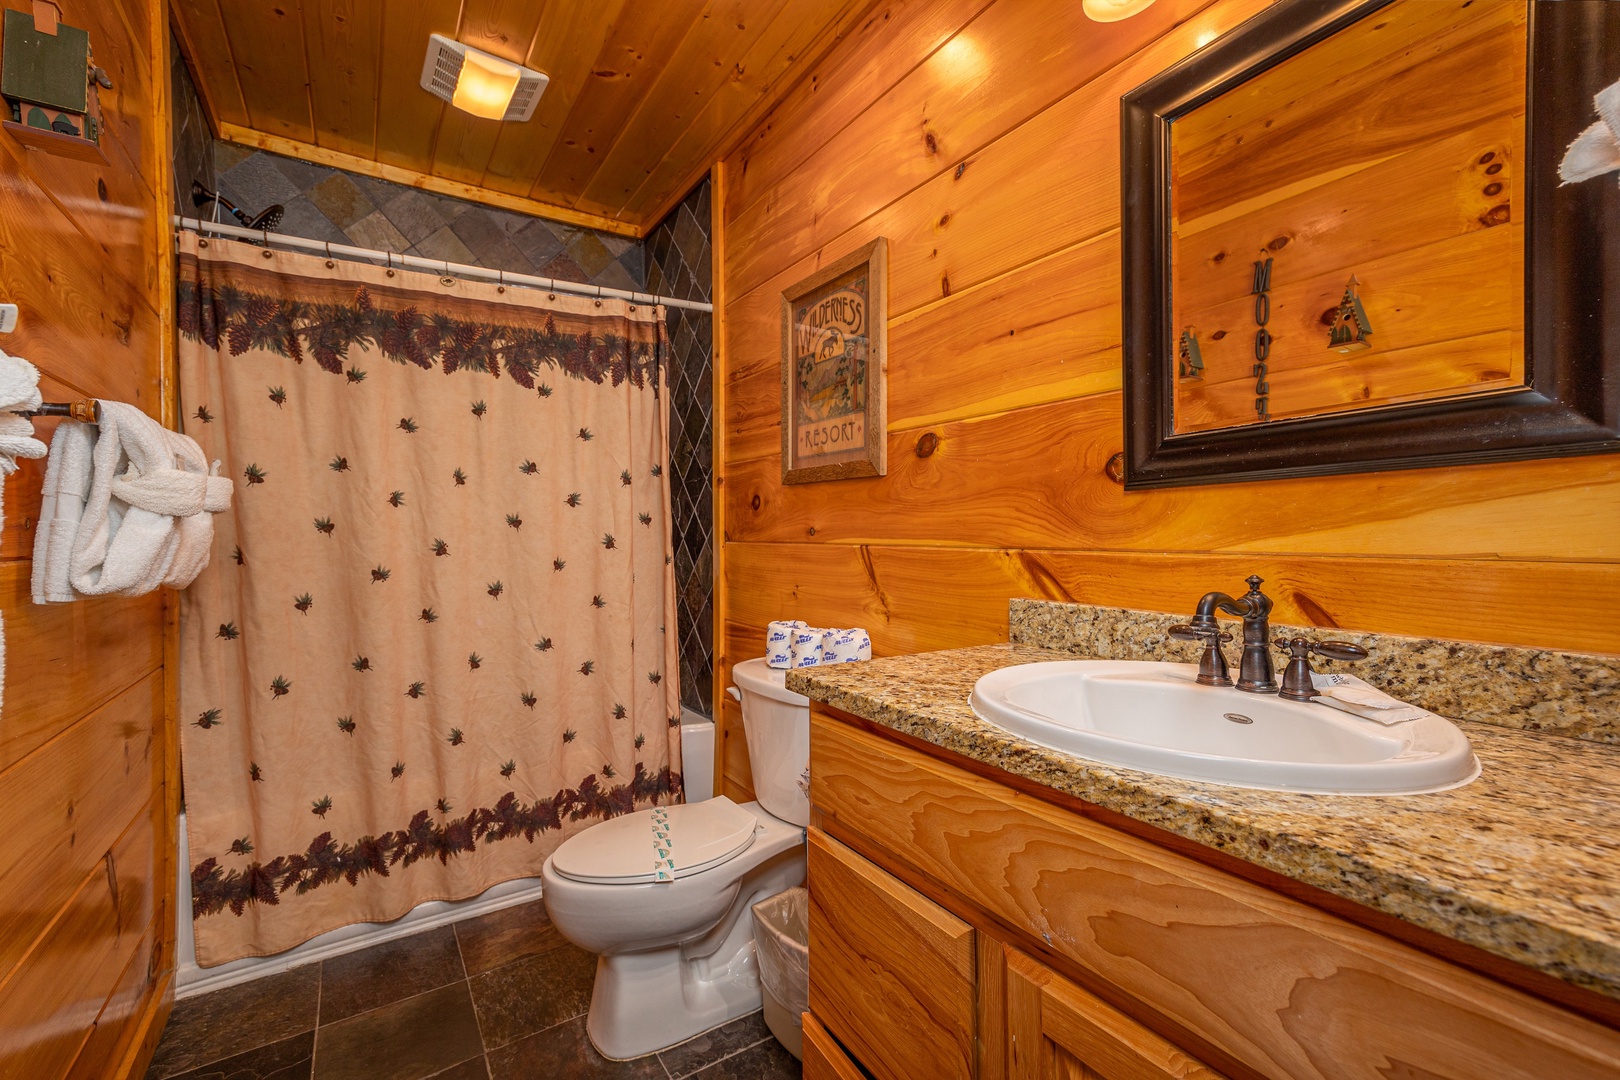 Bathroom at The Great Outdoors, a 3 bedroom cabin rental located in Pigeon Forge